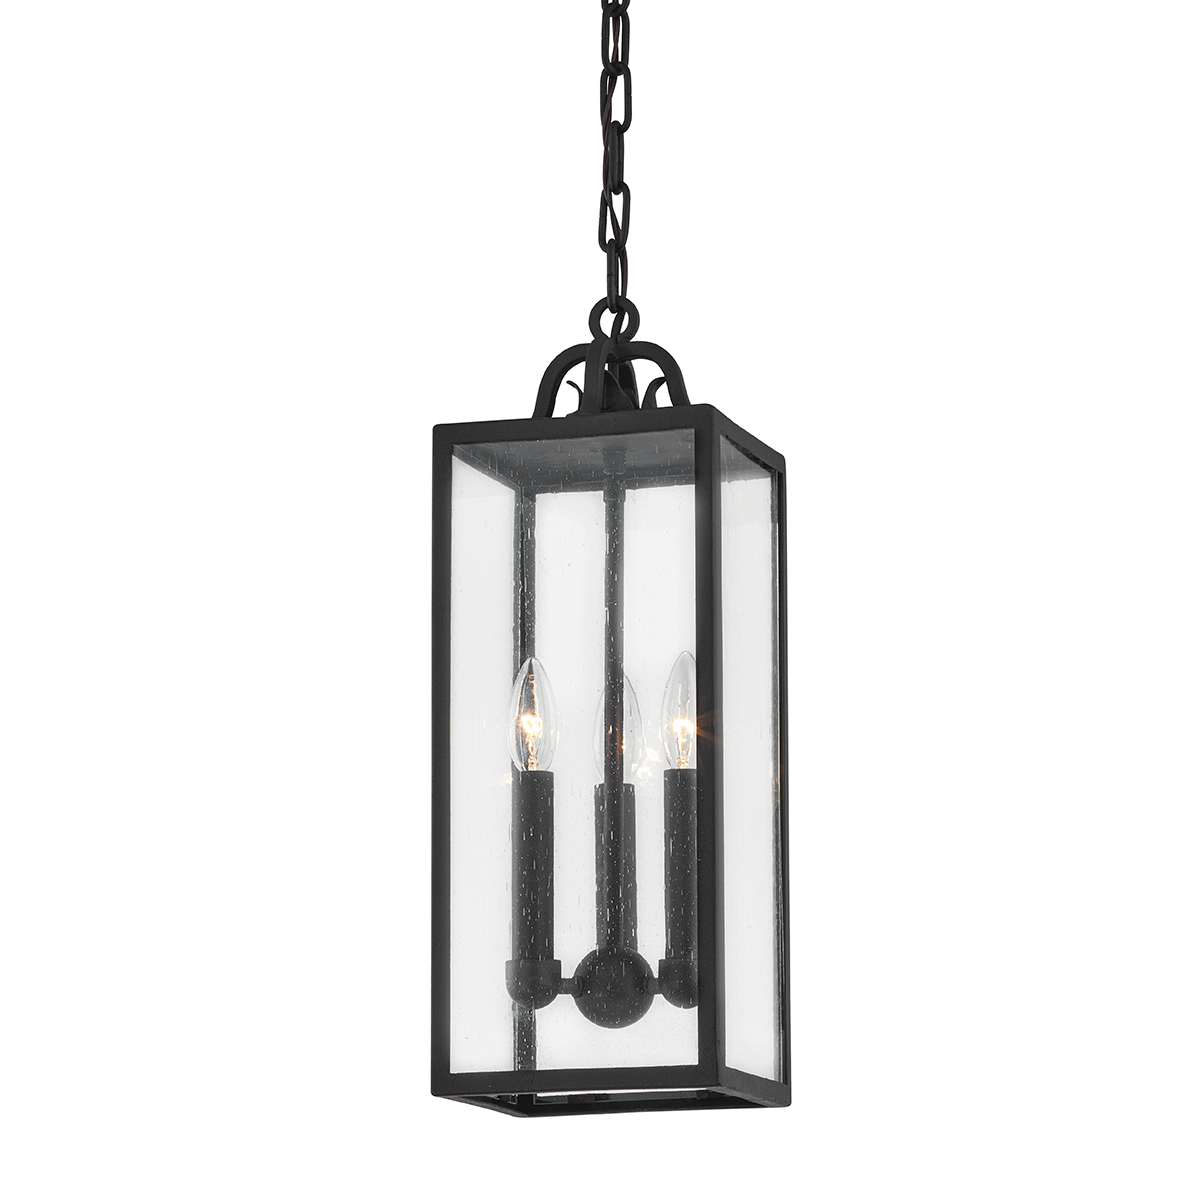 Troy Lighting 3 LIGHT EXTERIOR LANTERN F2066 Outdoor l Wall Troy Lighting FORGED IRON  